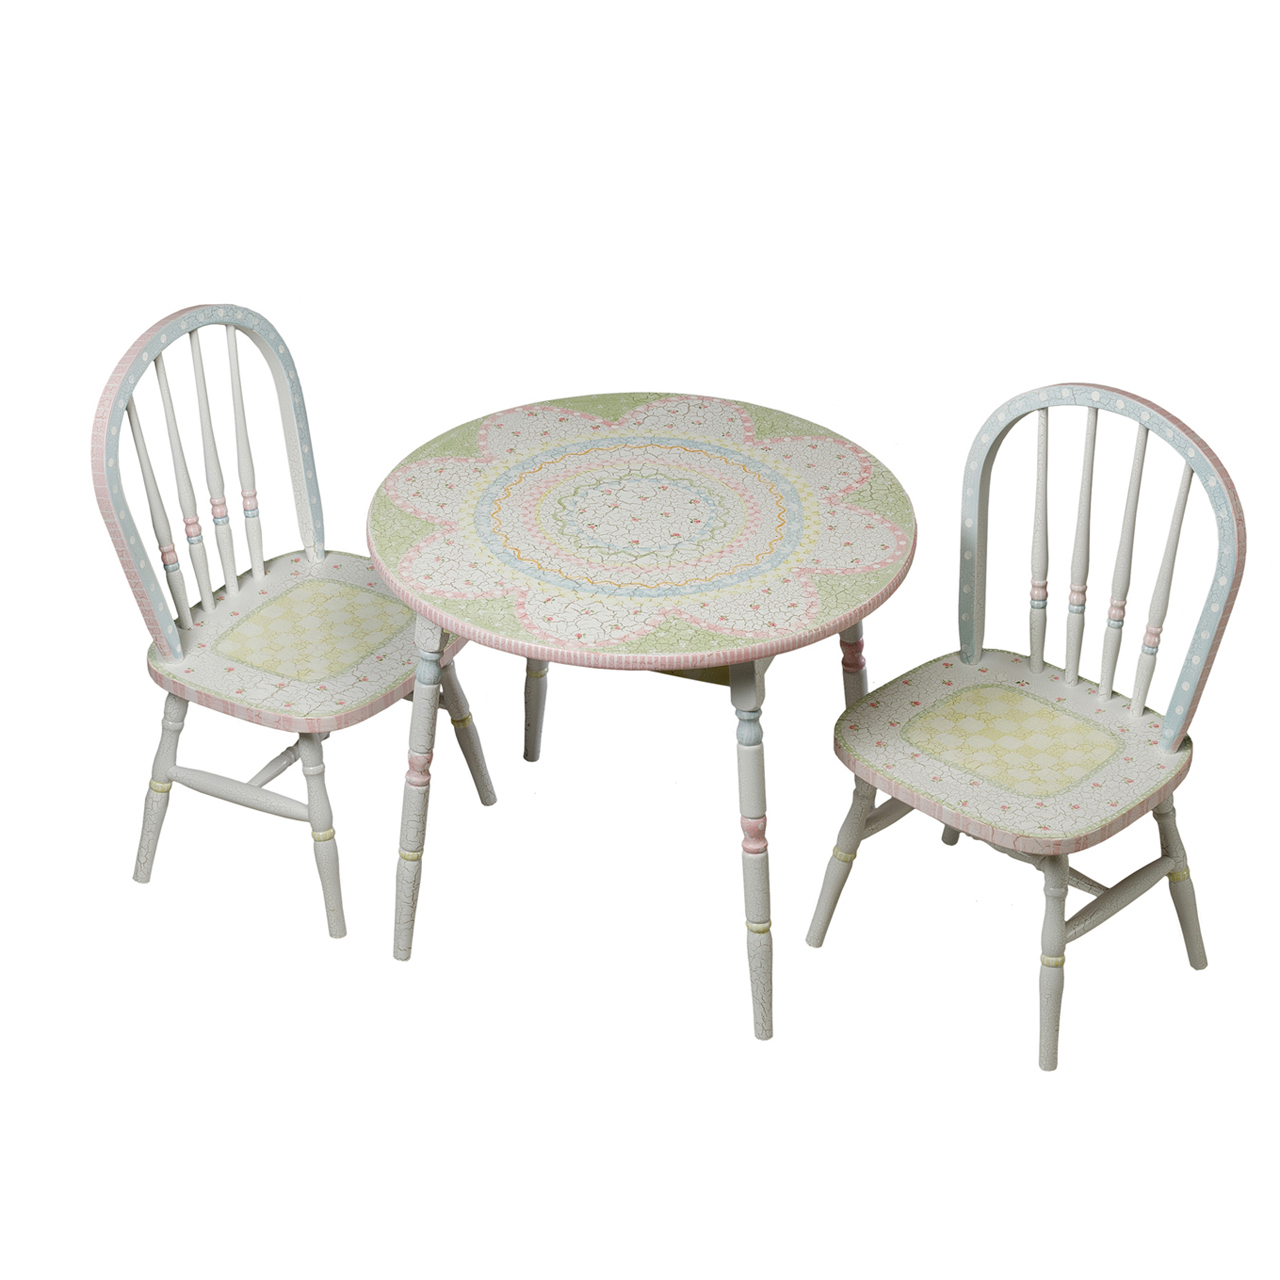 Round table and chairs for kids 9